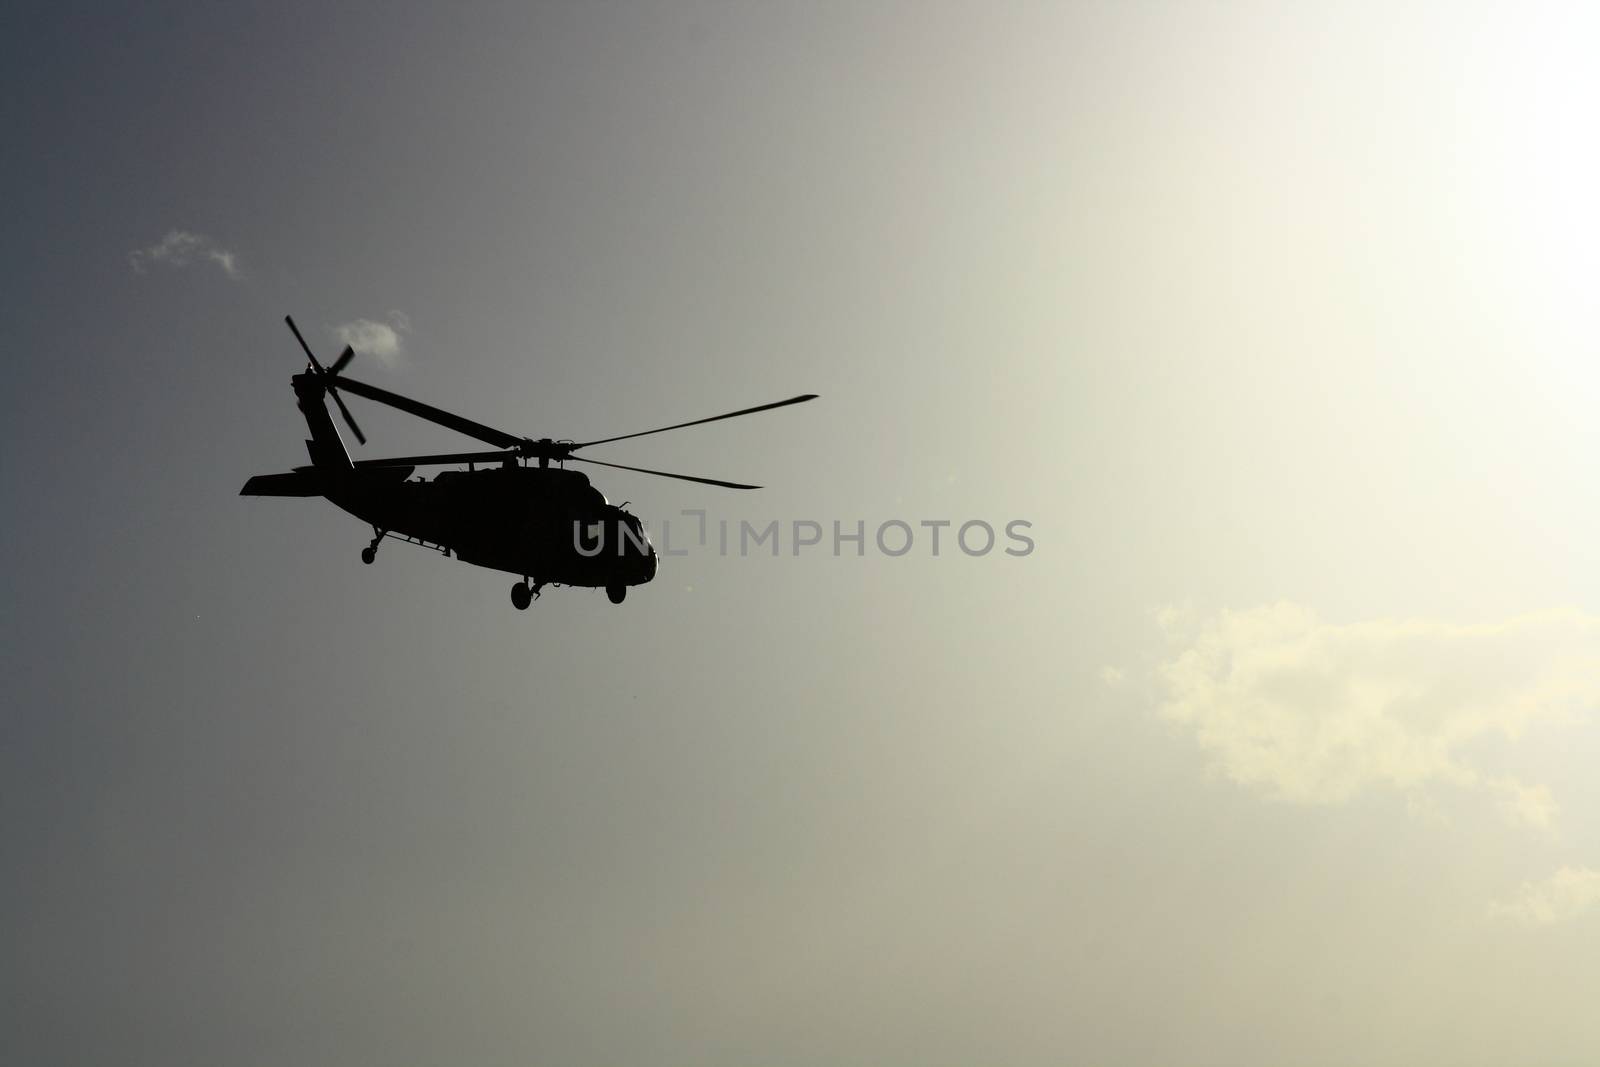 Helicopter at sunset with sun view by mturhanlar